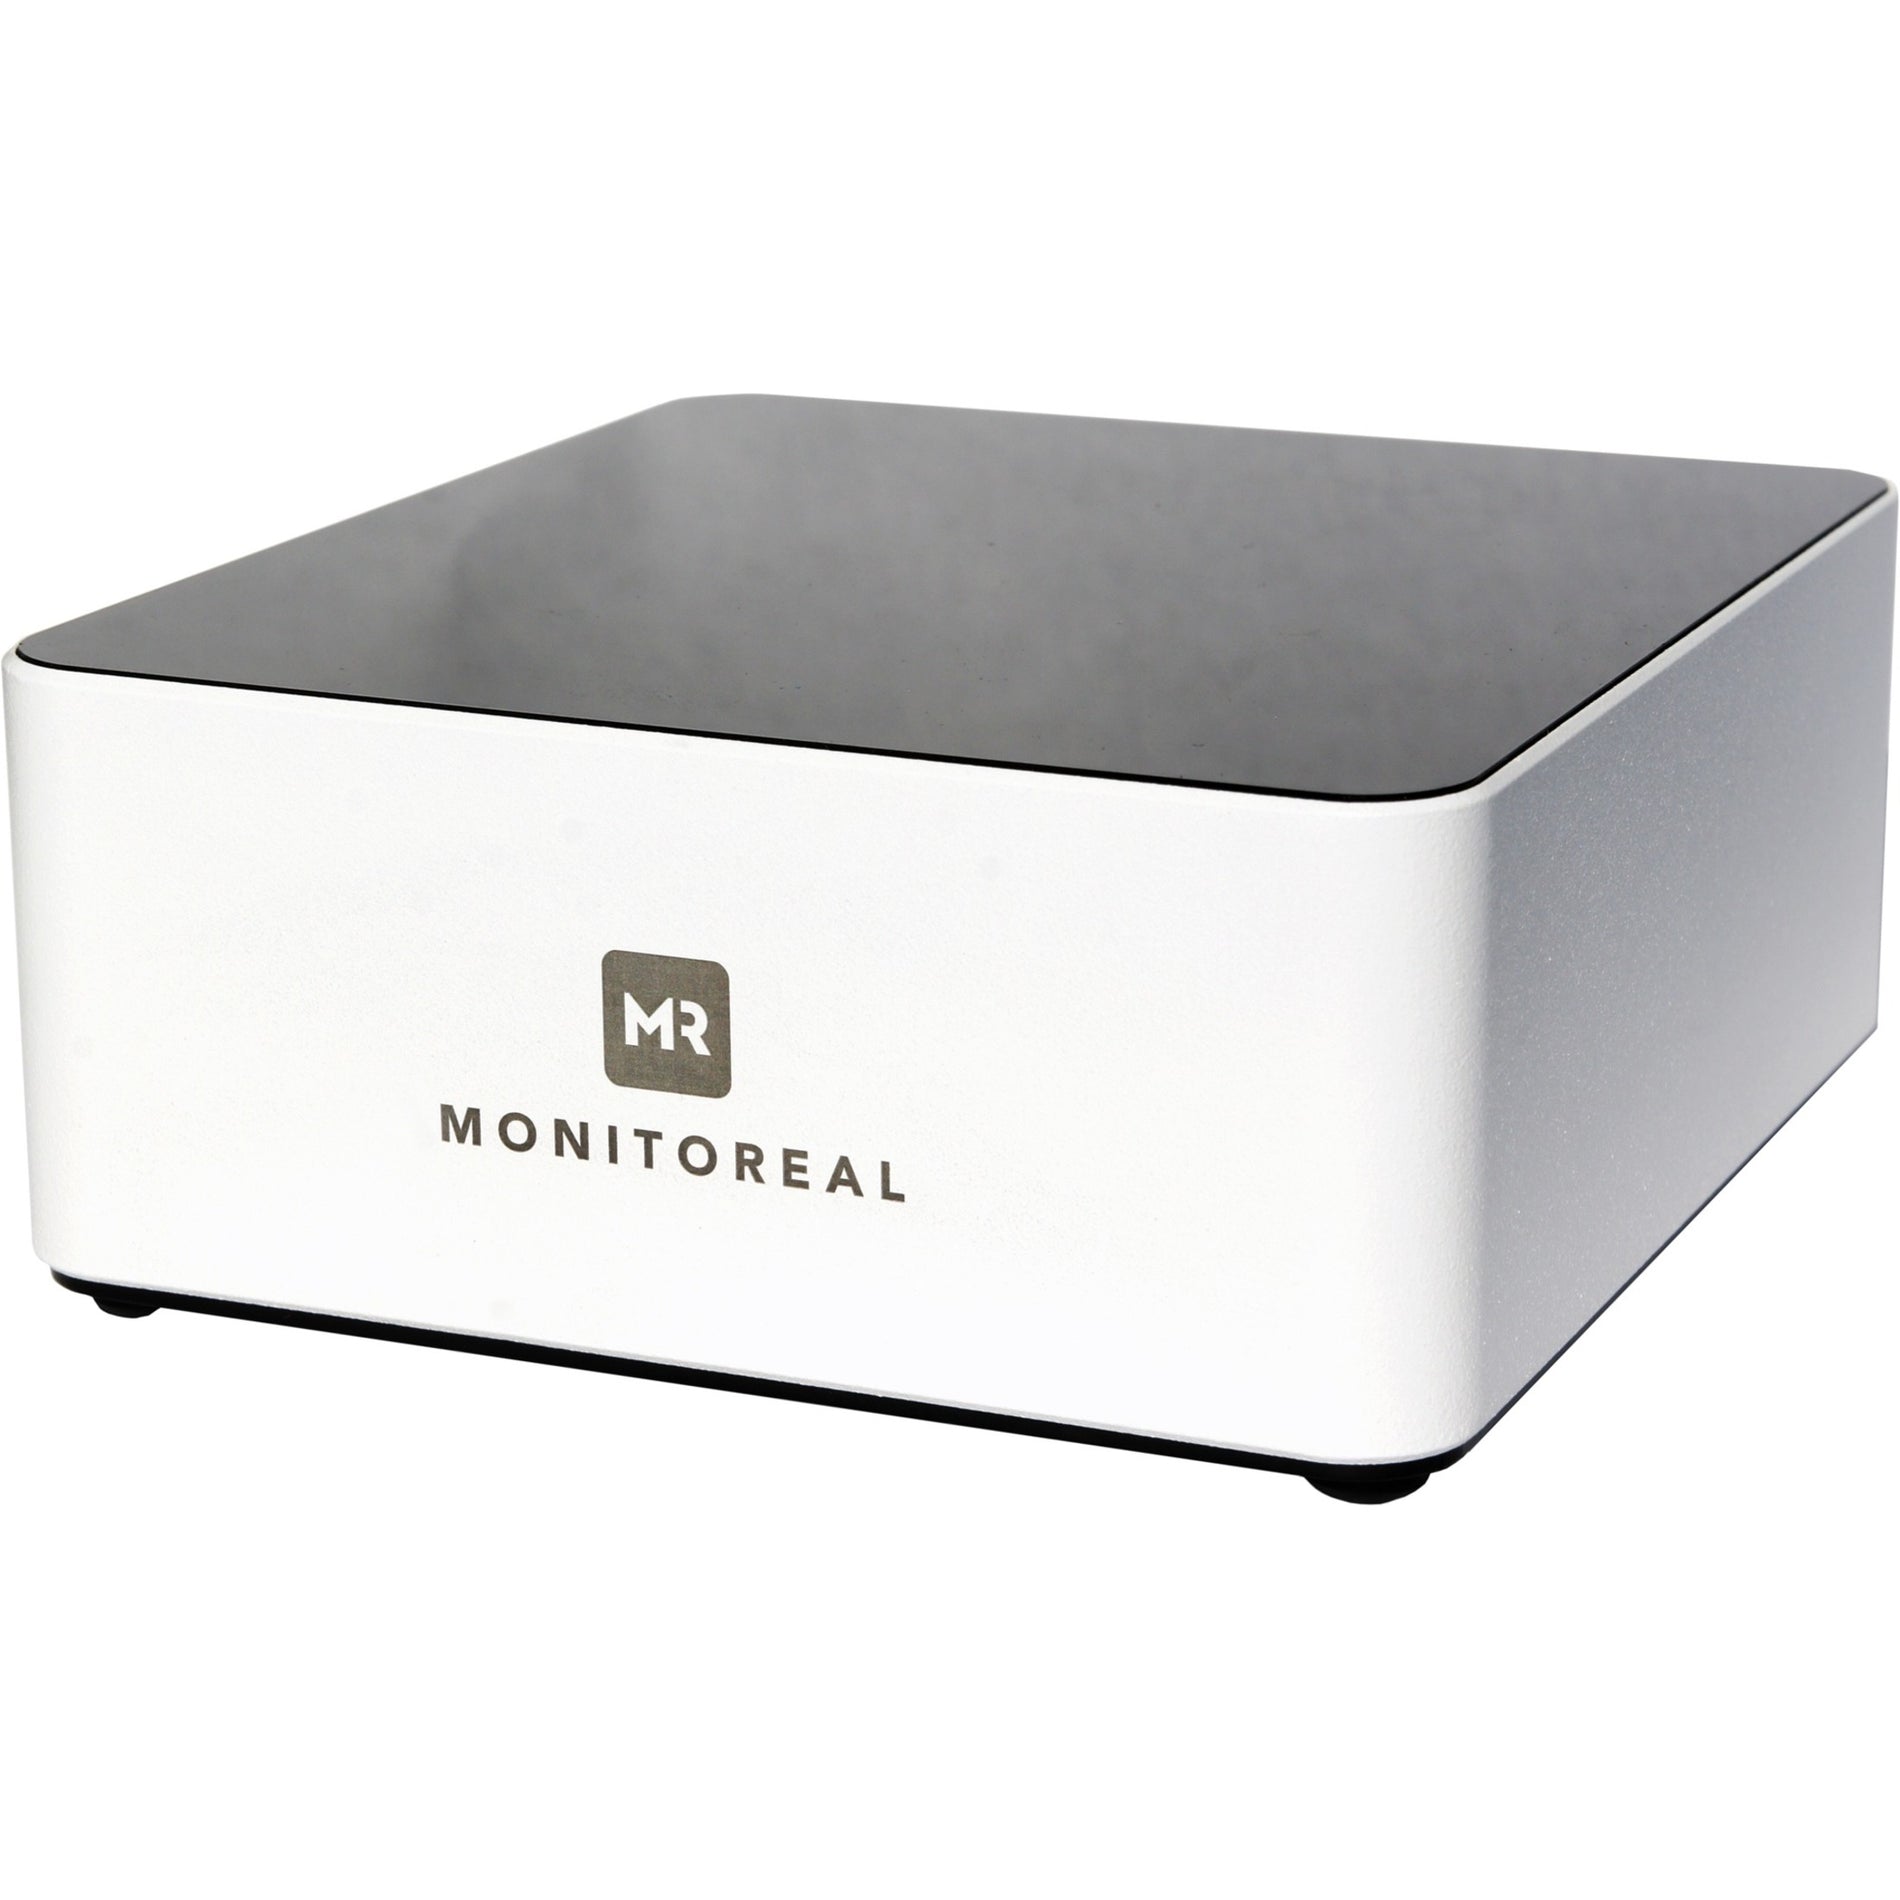 Monitoreal MRB10W-P2-E2-A5-F2 Video Security Assistant - Base Model - White, 6 Channel, Object Detection, 32GB Memory, 18 Month Warranty